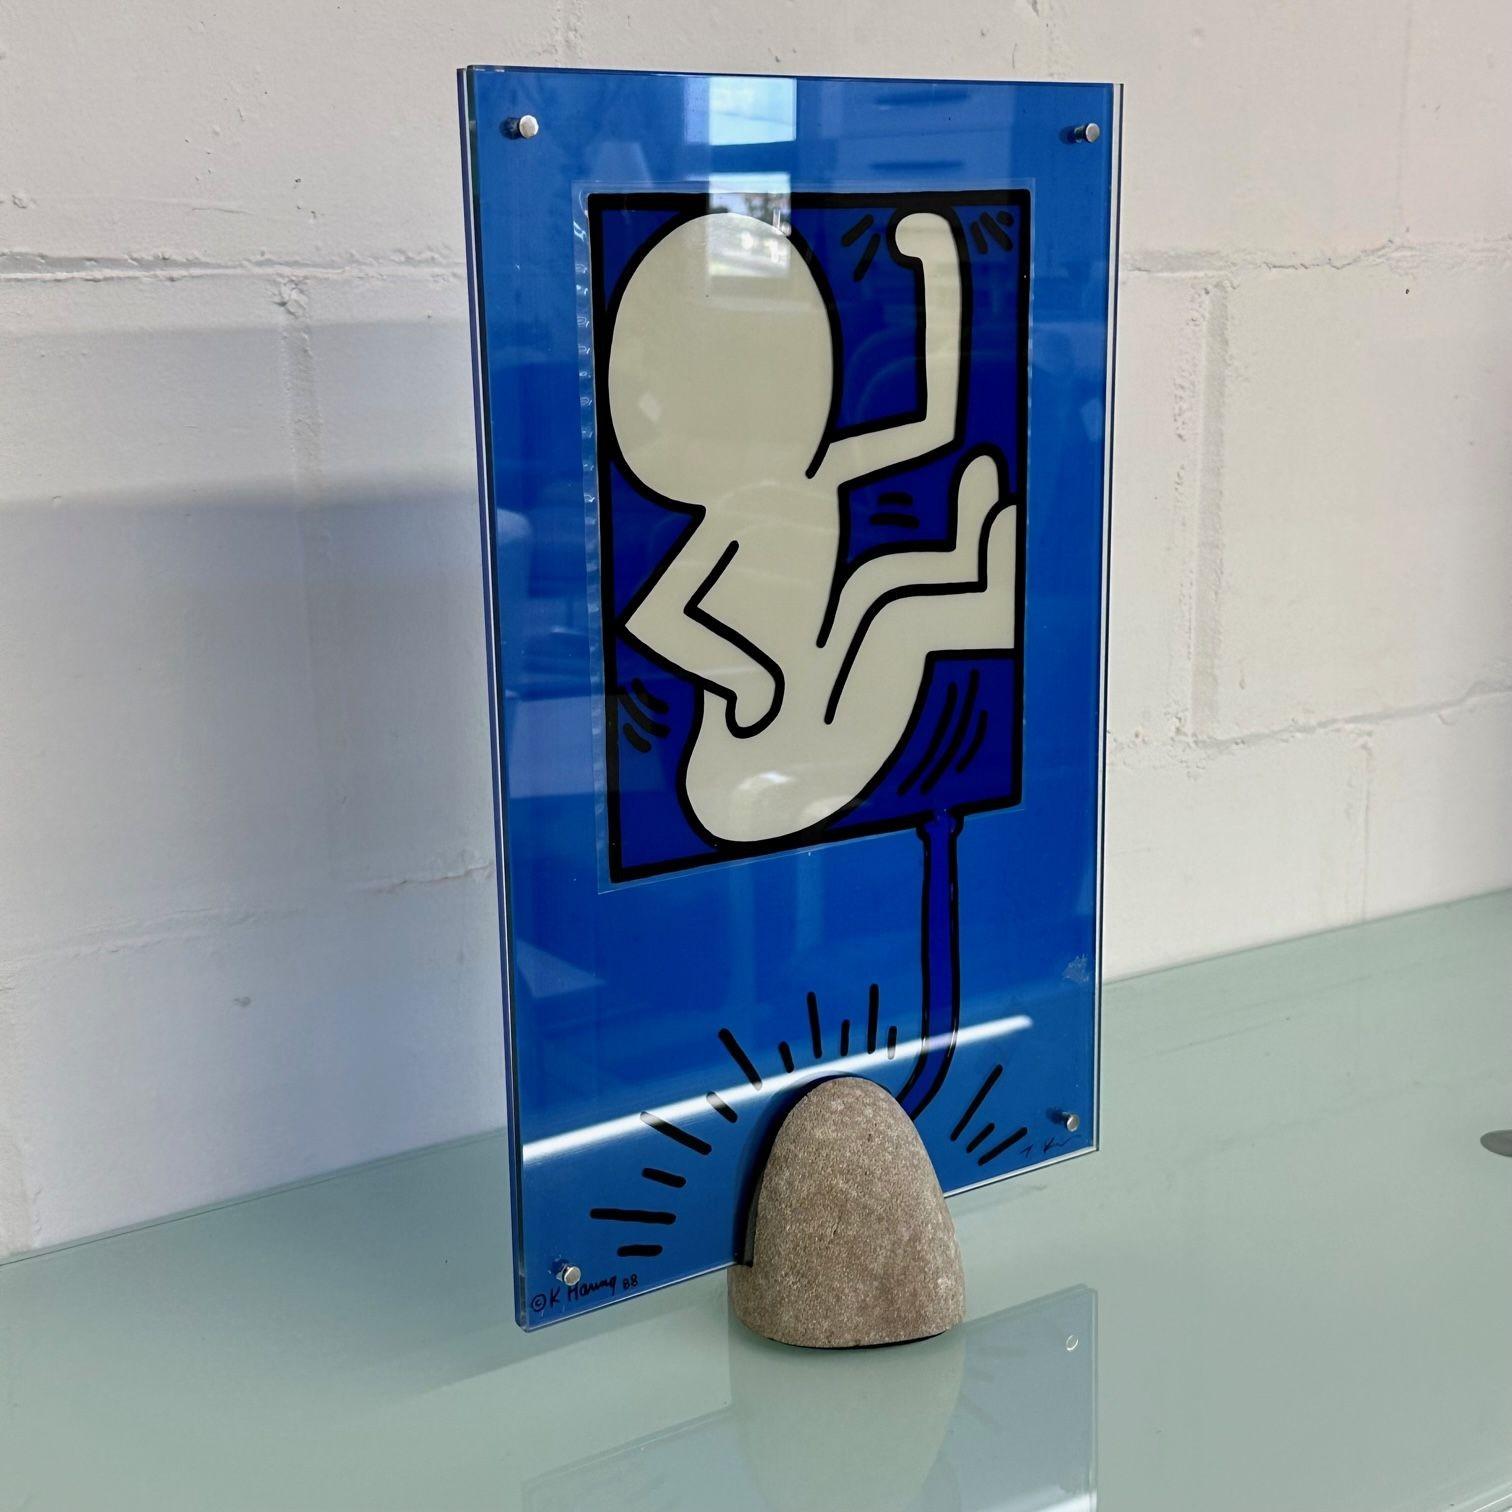 Late 20th Century Mid-Century Modern Keith Haring Sculpture / Lamp, Glass and Stone, Signed, 1988